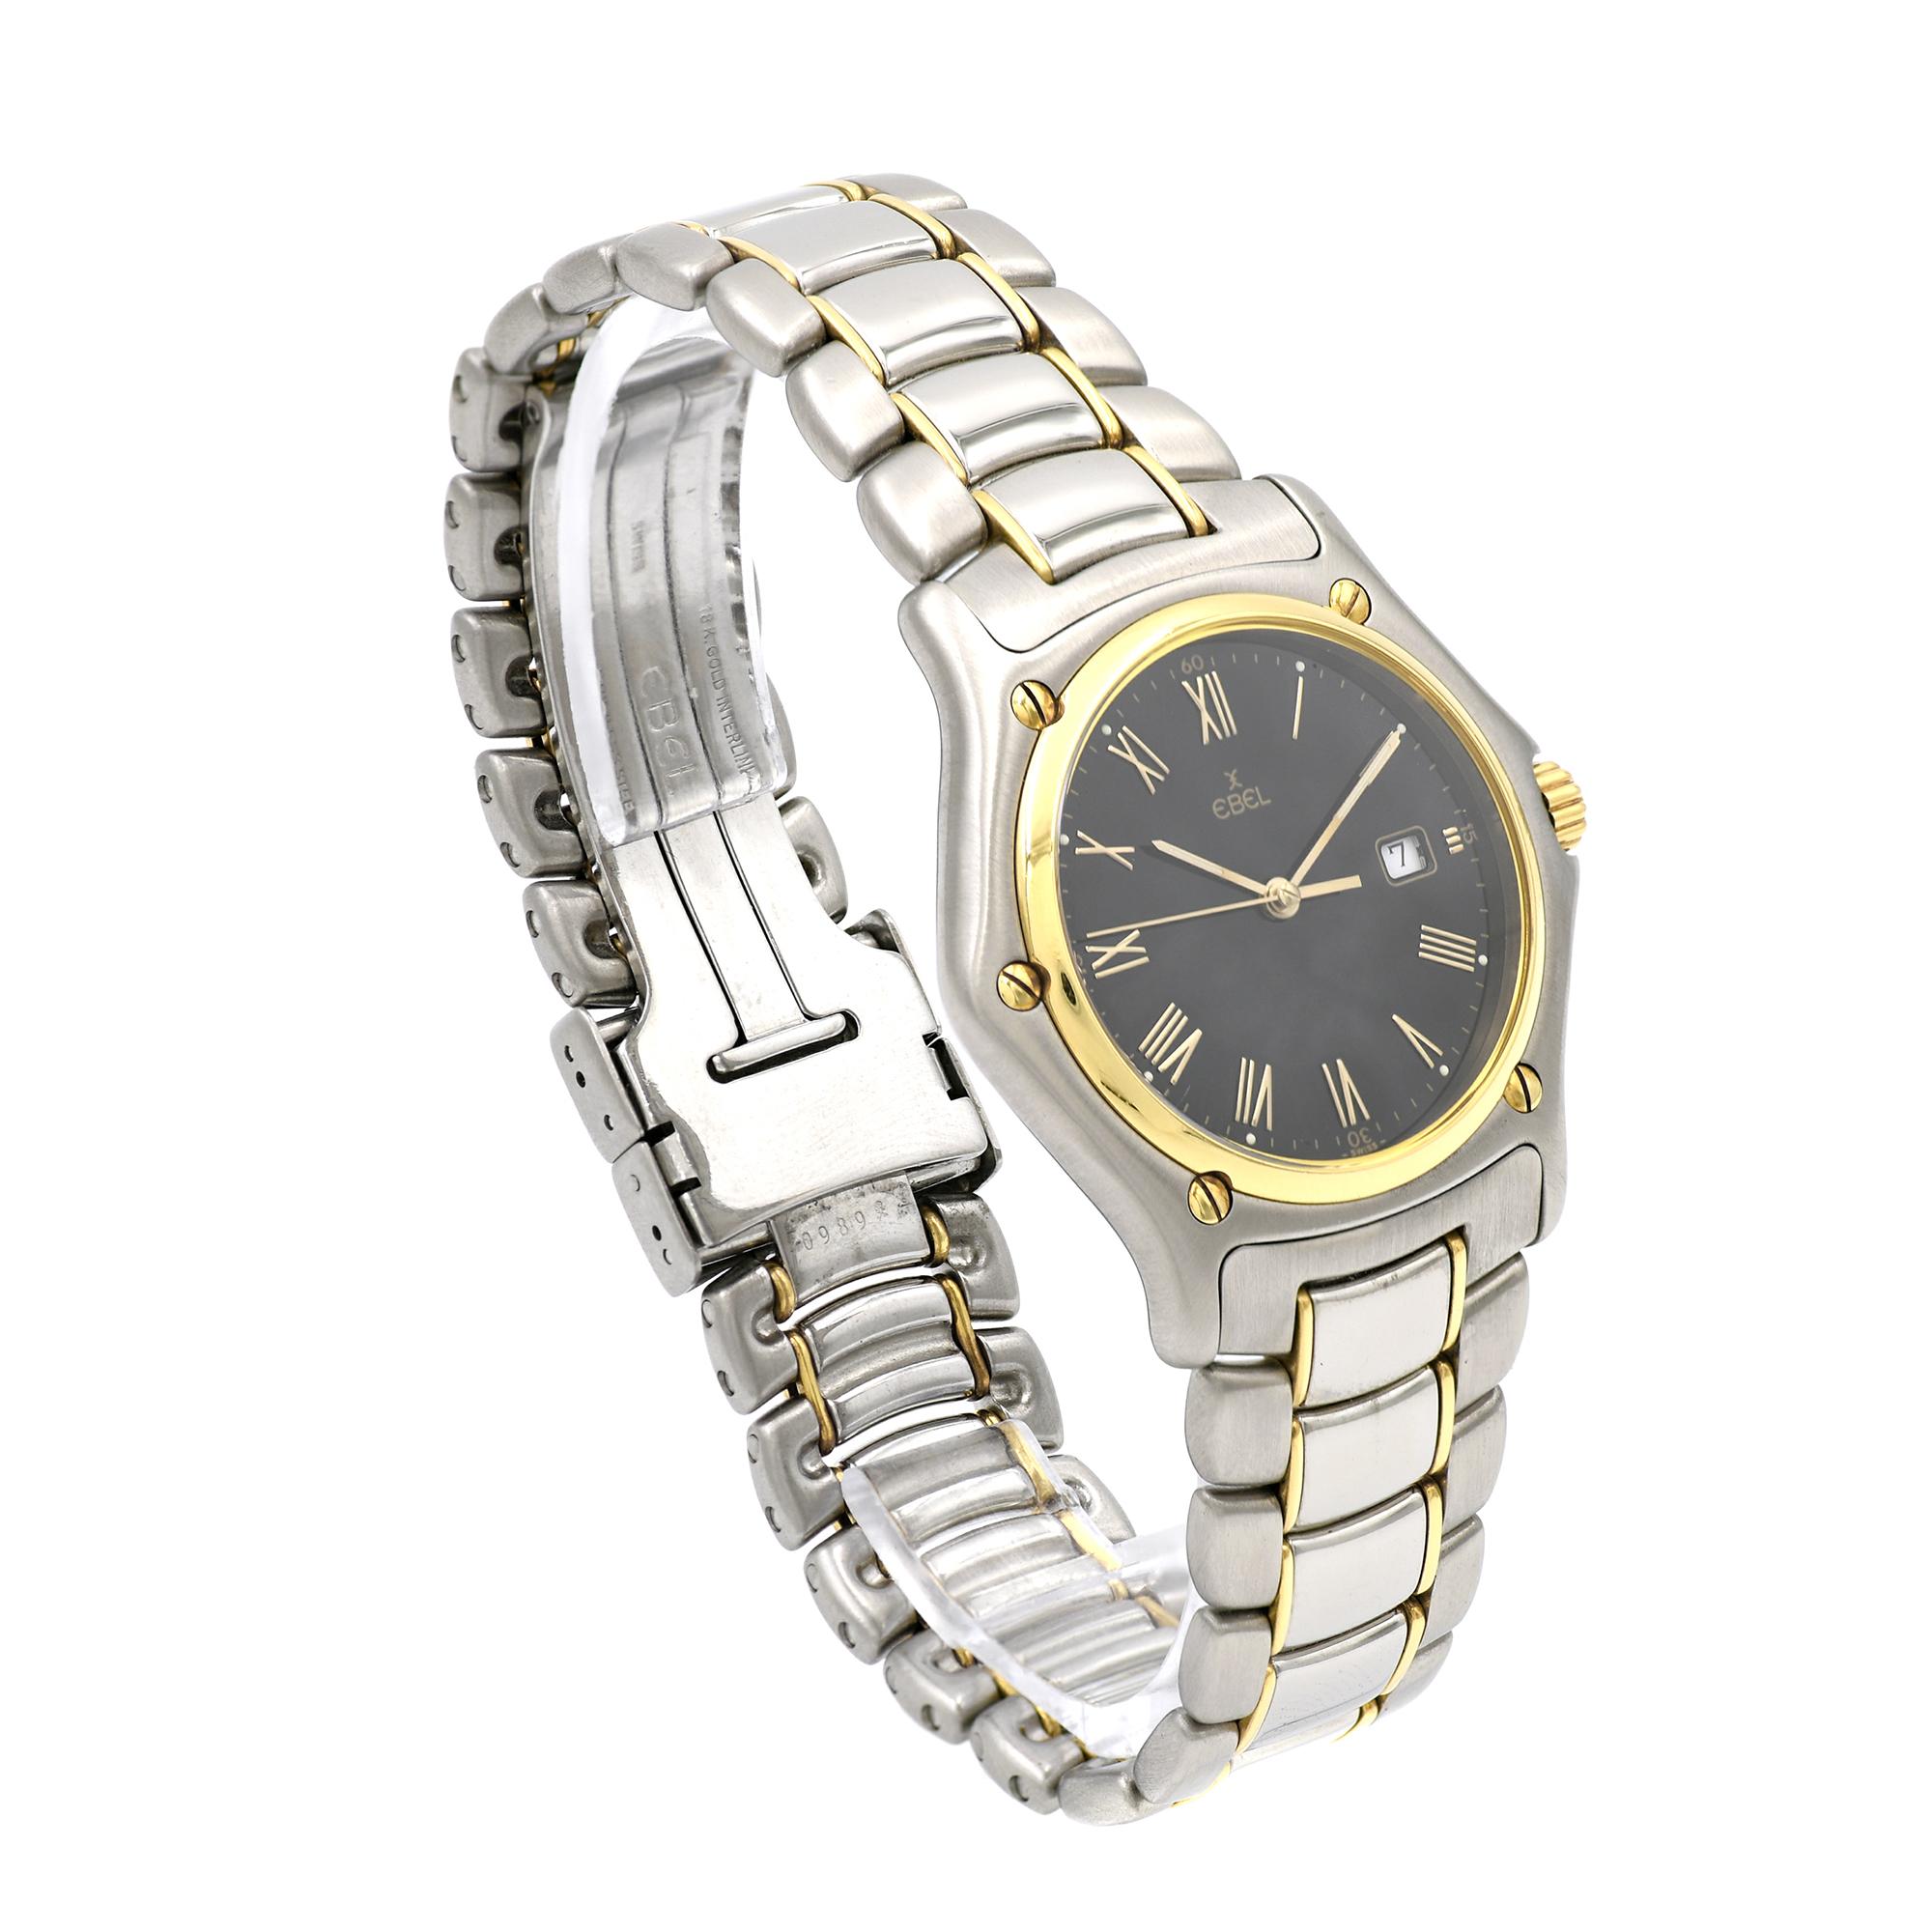 18k yellow gold and steel Ebel 1911 with Ebel band. Reliable Quartz movement. Water resistant. 

18k yellow gold and steel 
Strap length: 7.5 inches 
86.4 grams 
Length: 38mm 
Width: 33mm 
Band width at case: 14mm 
Case thickness: 7.56mm 
Band: 18k